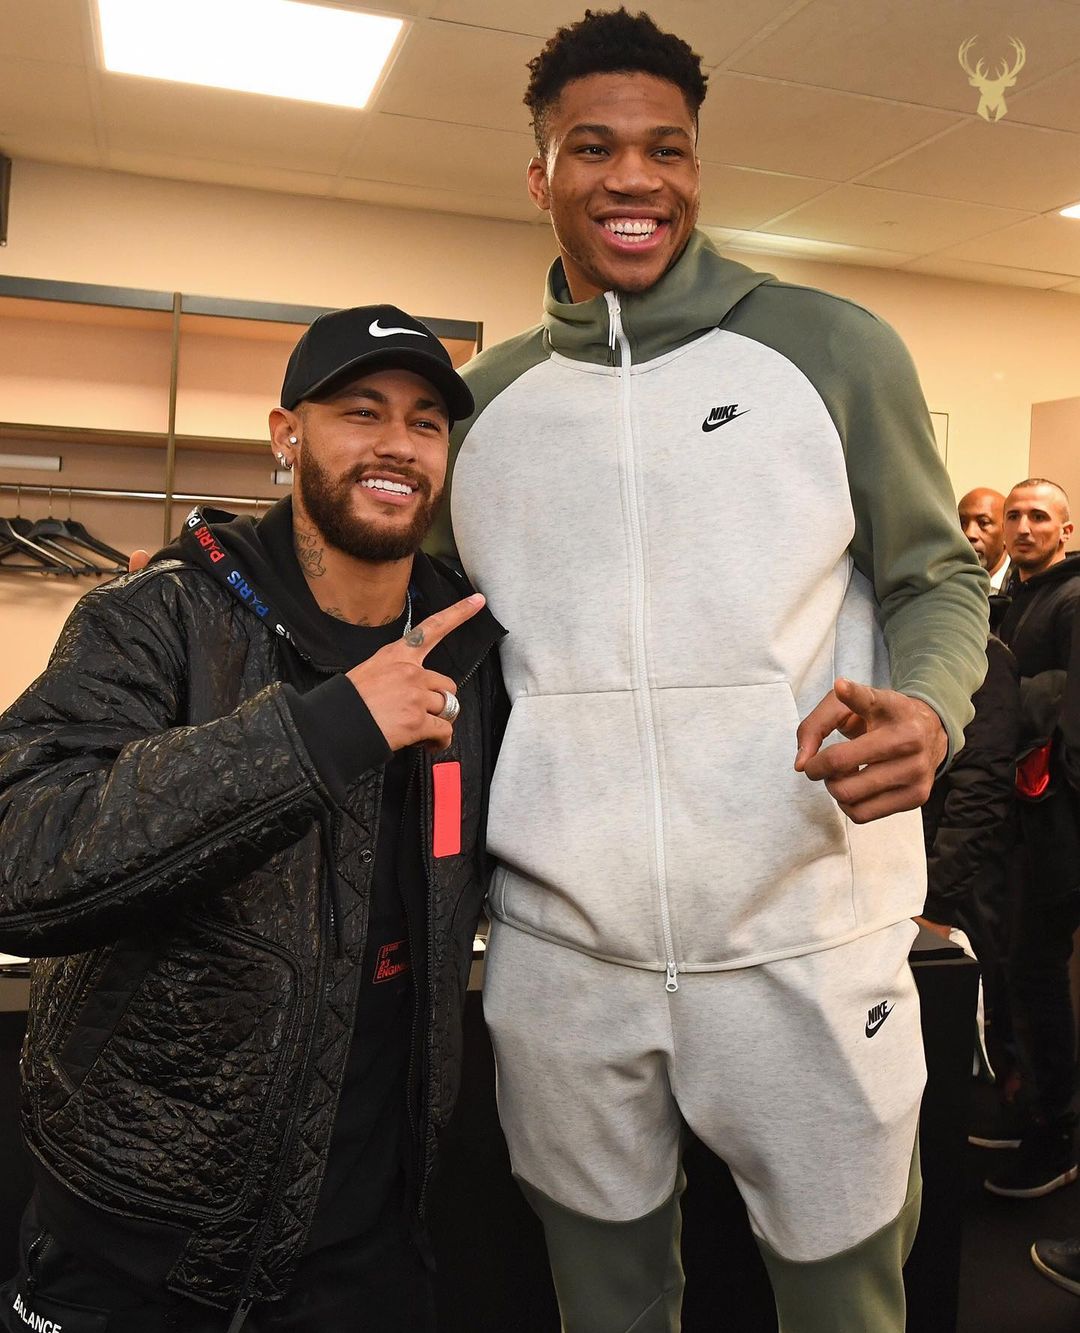 OTD in 2020, the Bucks played the Hornets in Paris & some special guests stopped...